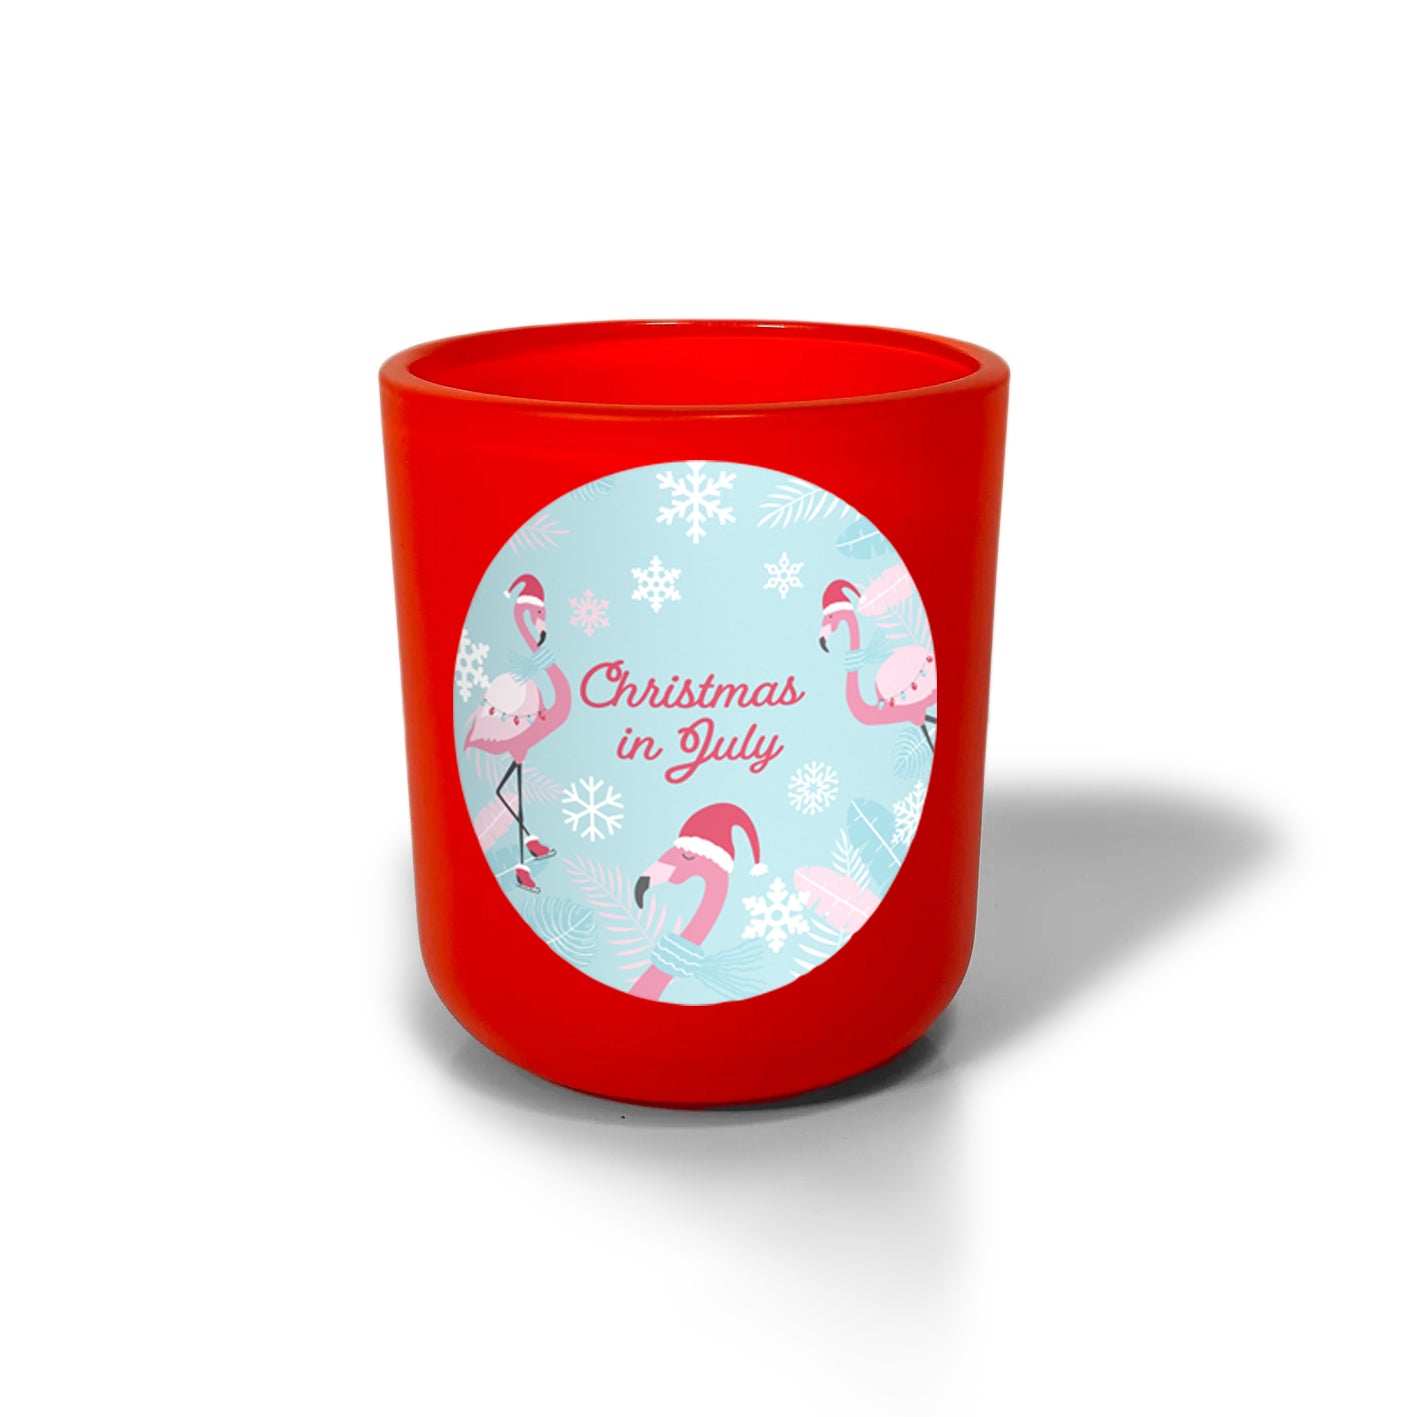 Christmas in July - 12 oz Candle